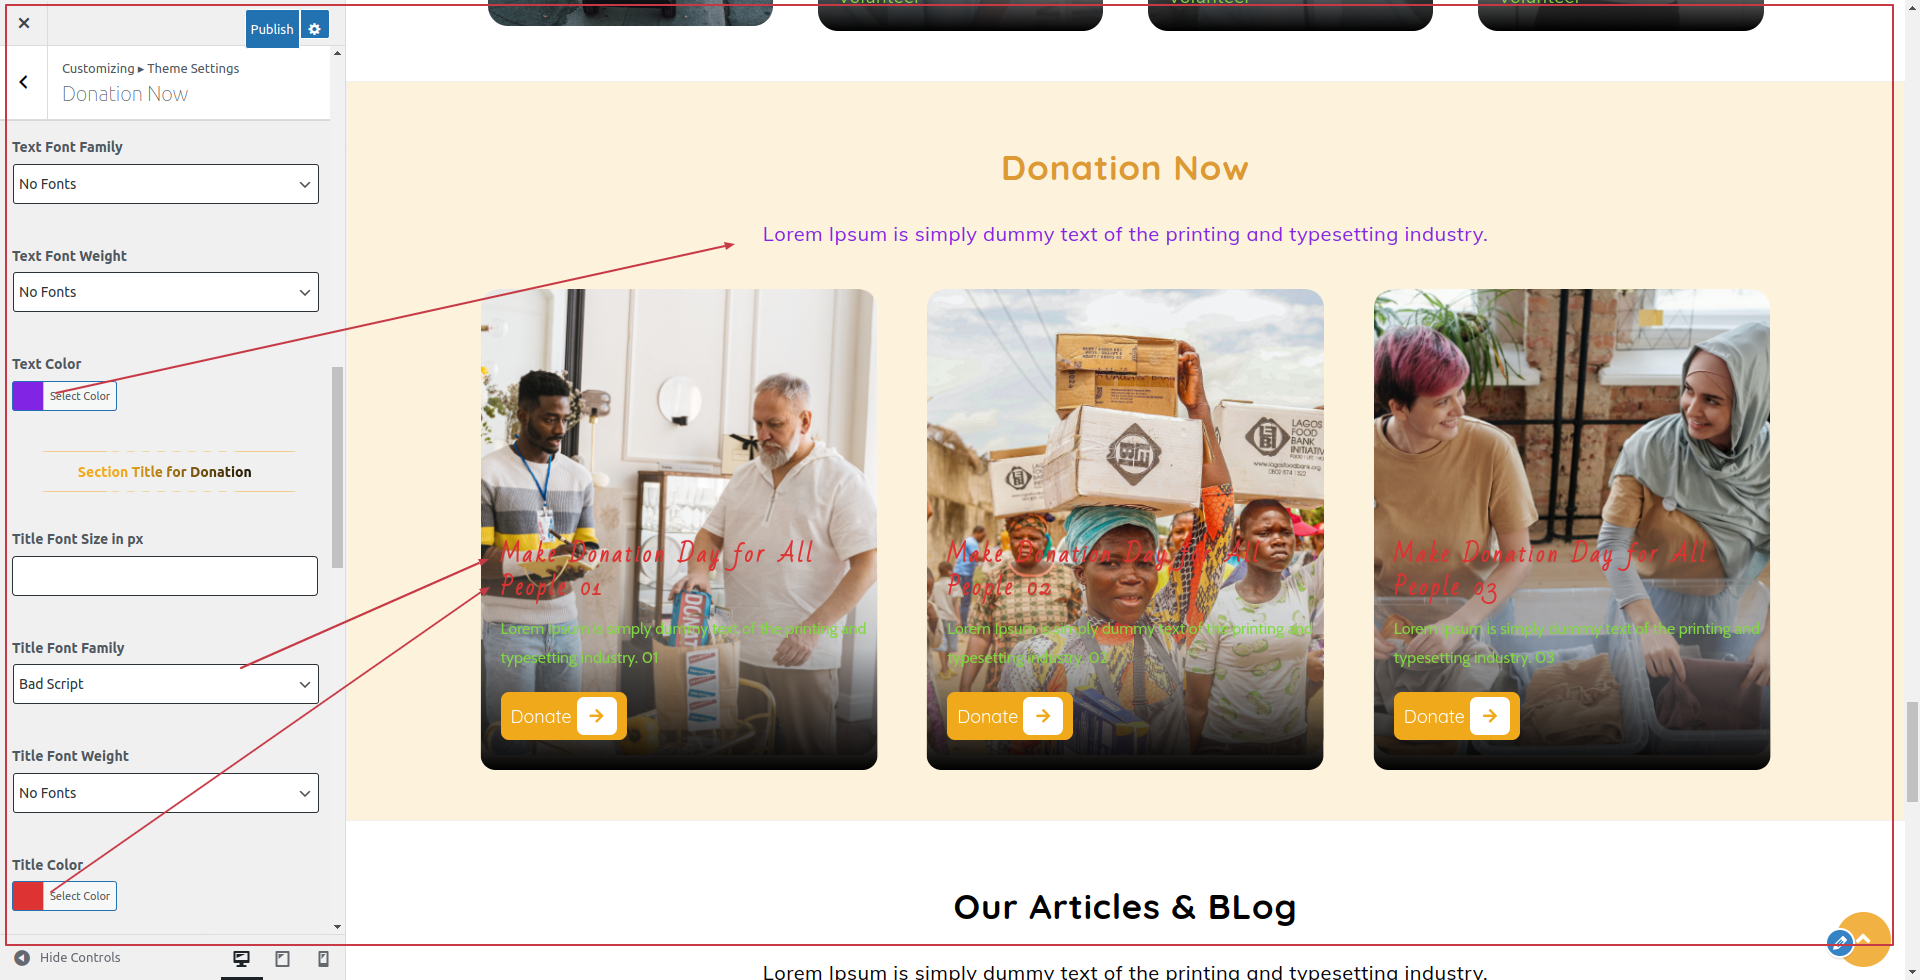 Donation Now Section